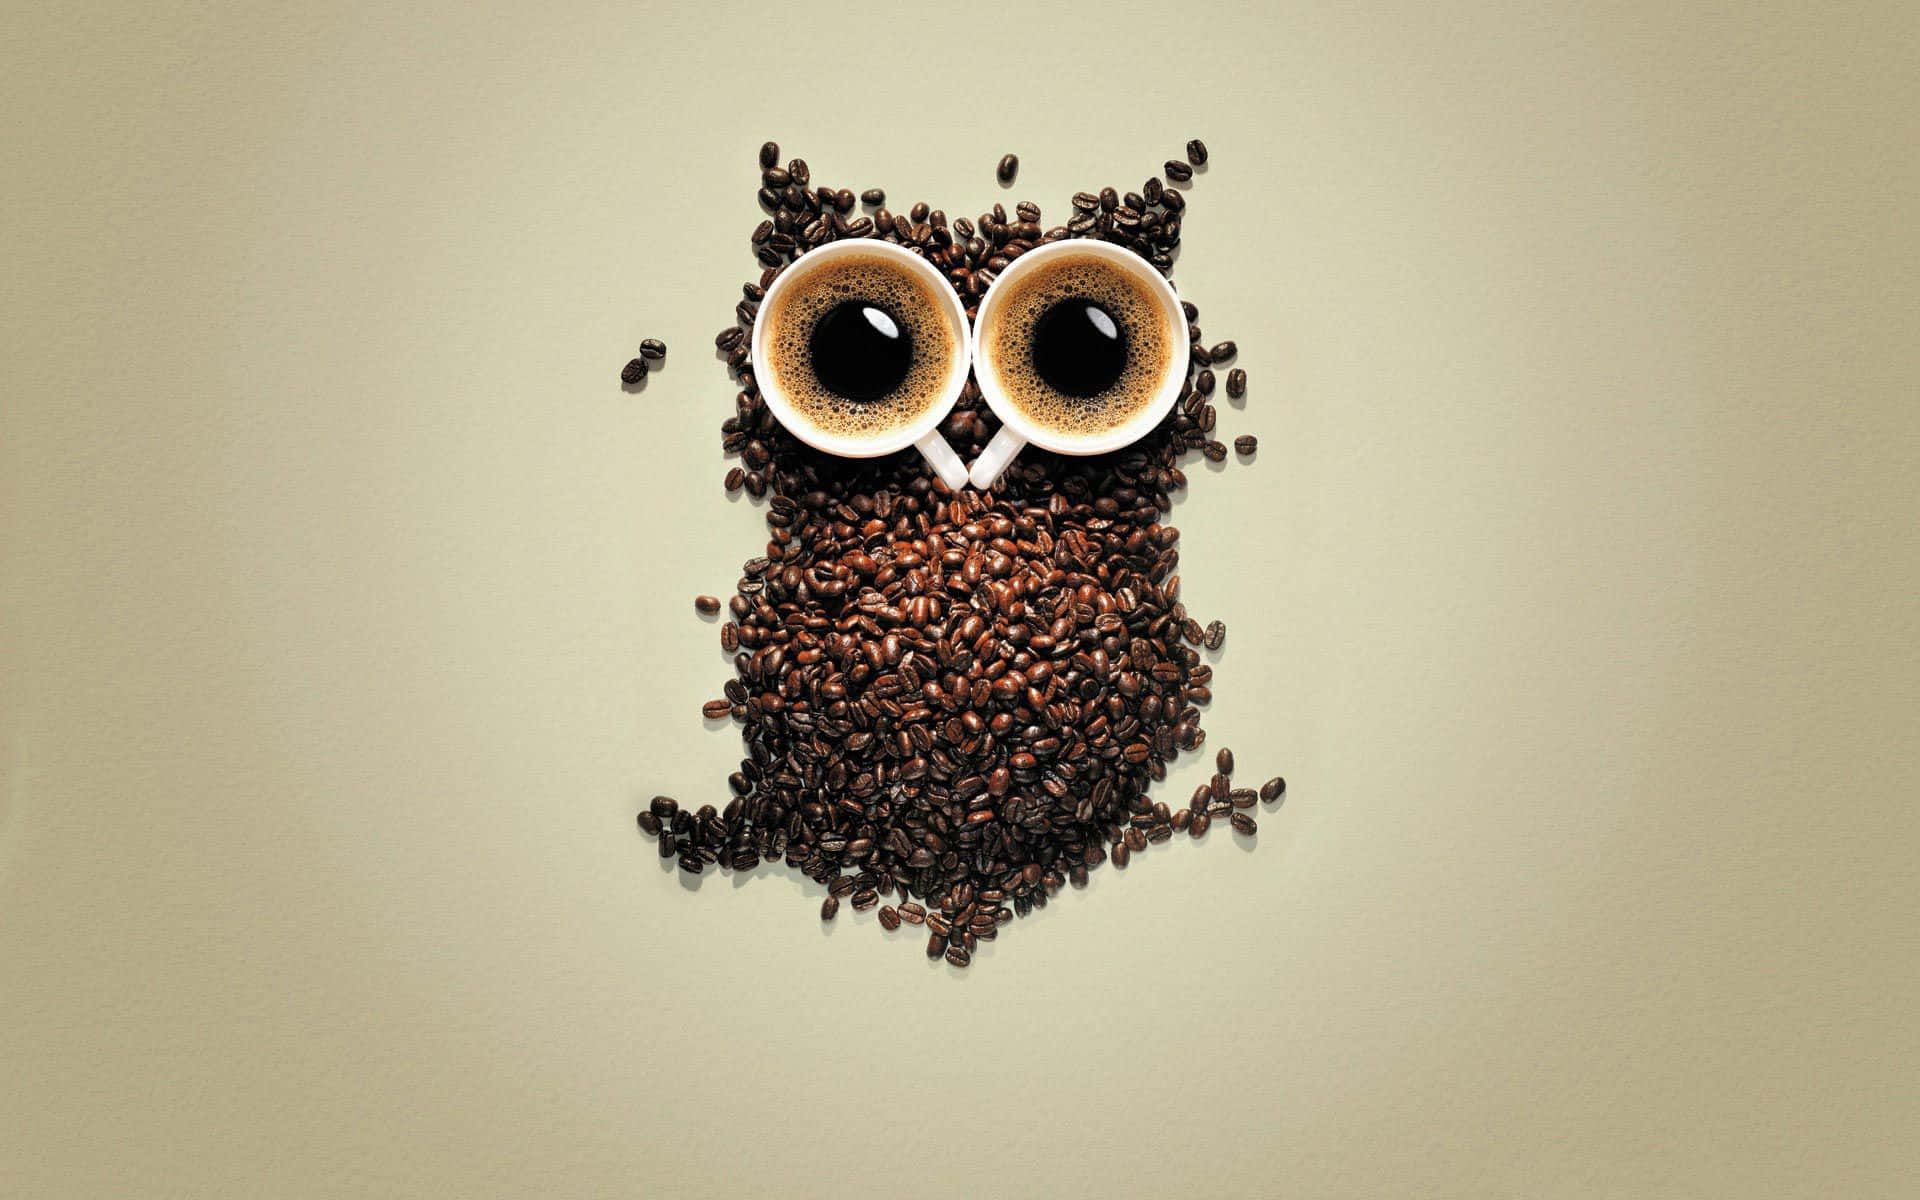 Get your caffeine fix with something cute! Wallpaper